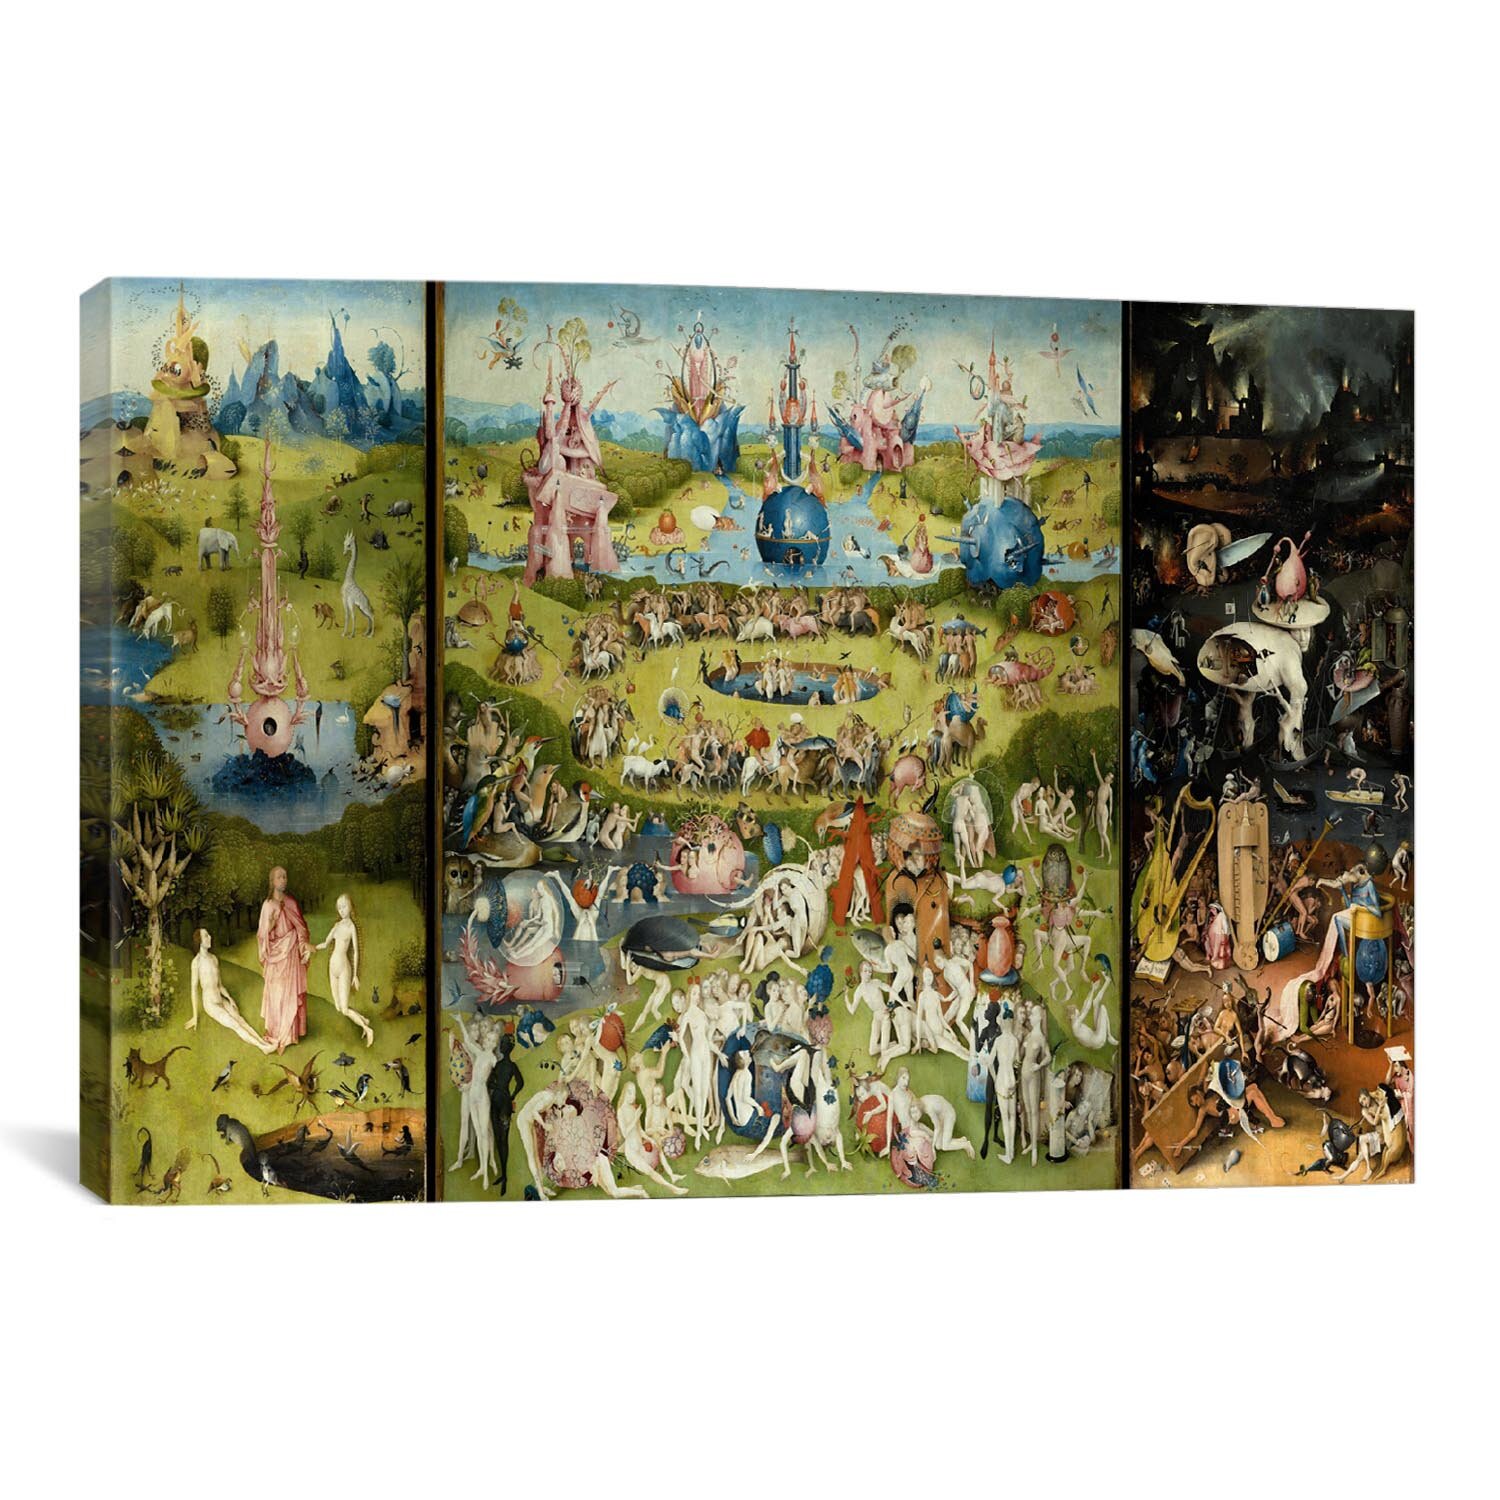 Astoria Grand The Garden Of Earthly Delights 1504 By Hieronymus